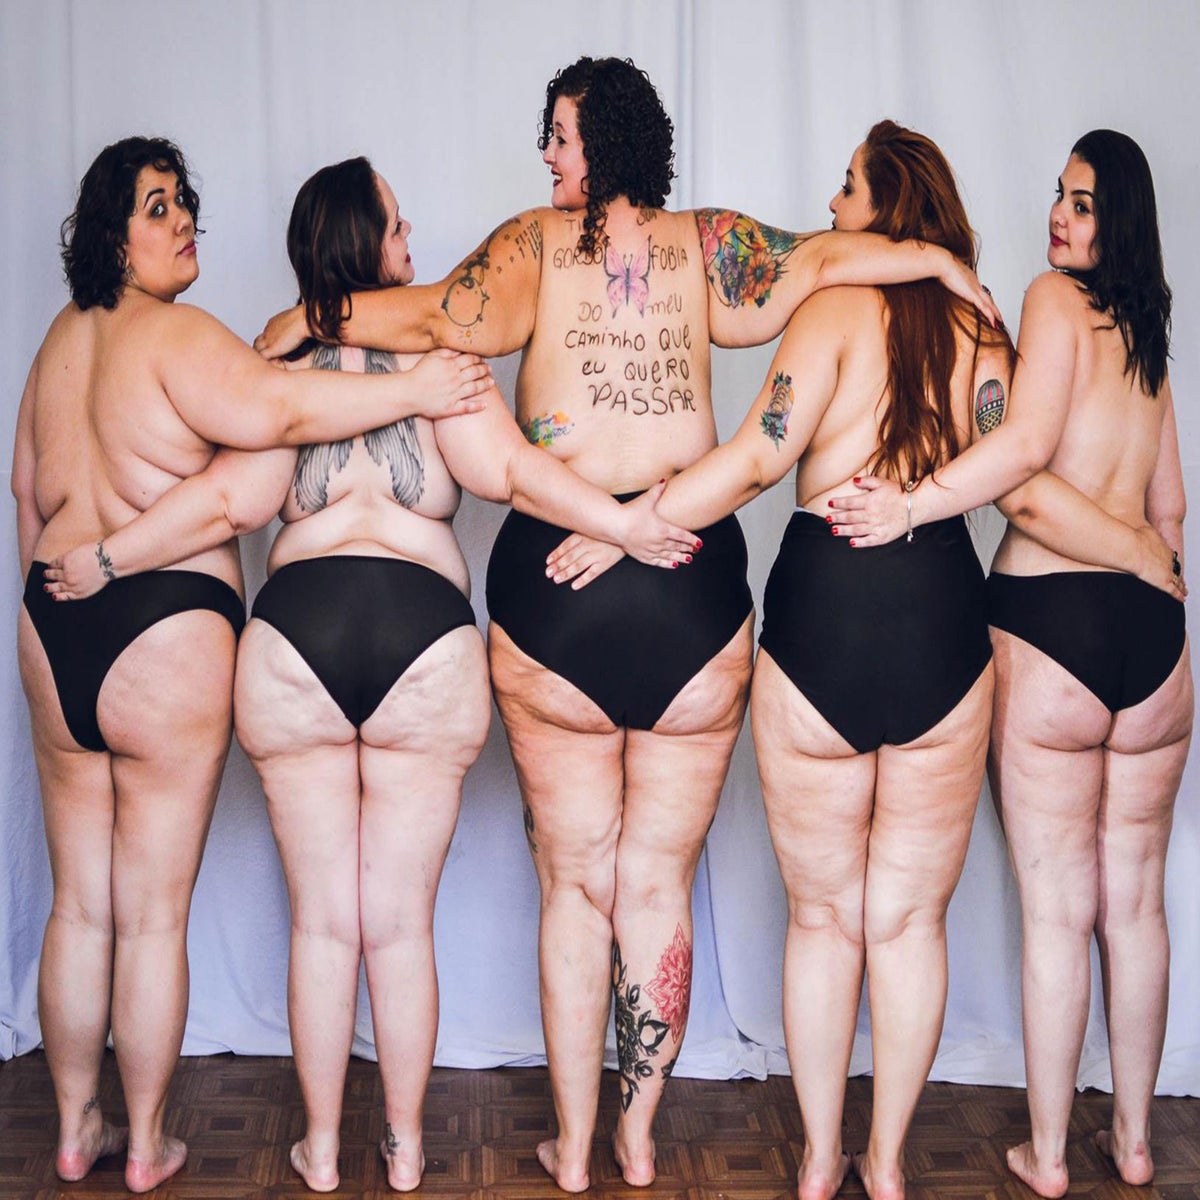 Empowering Photos That Show There's No One Bikini Body